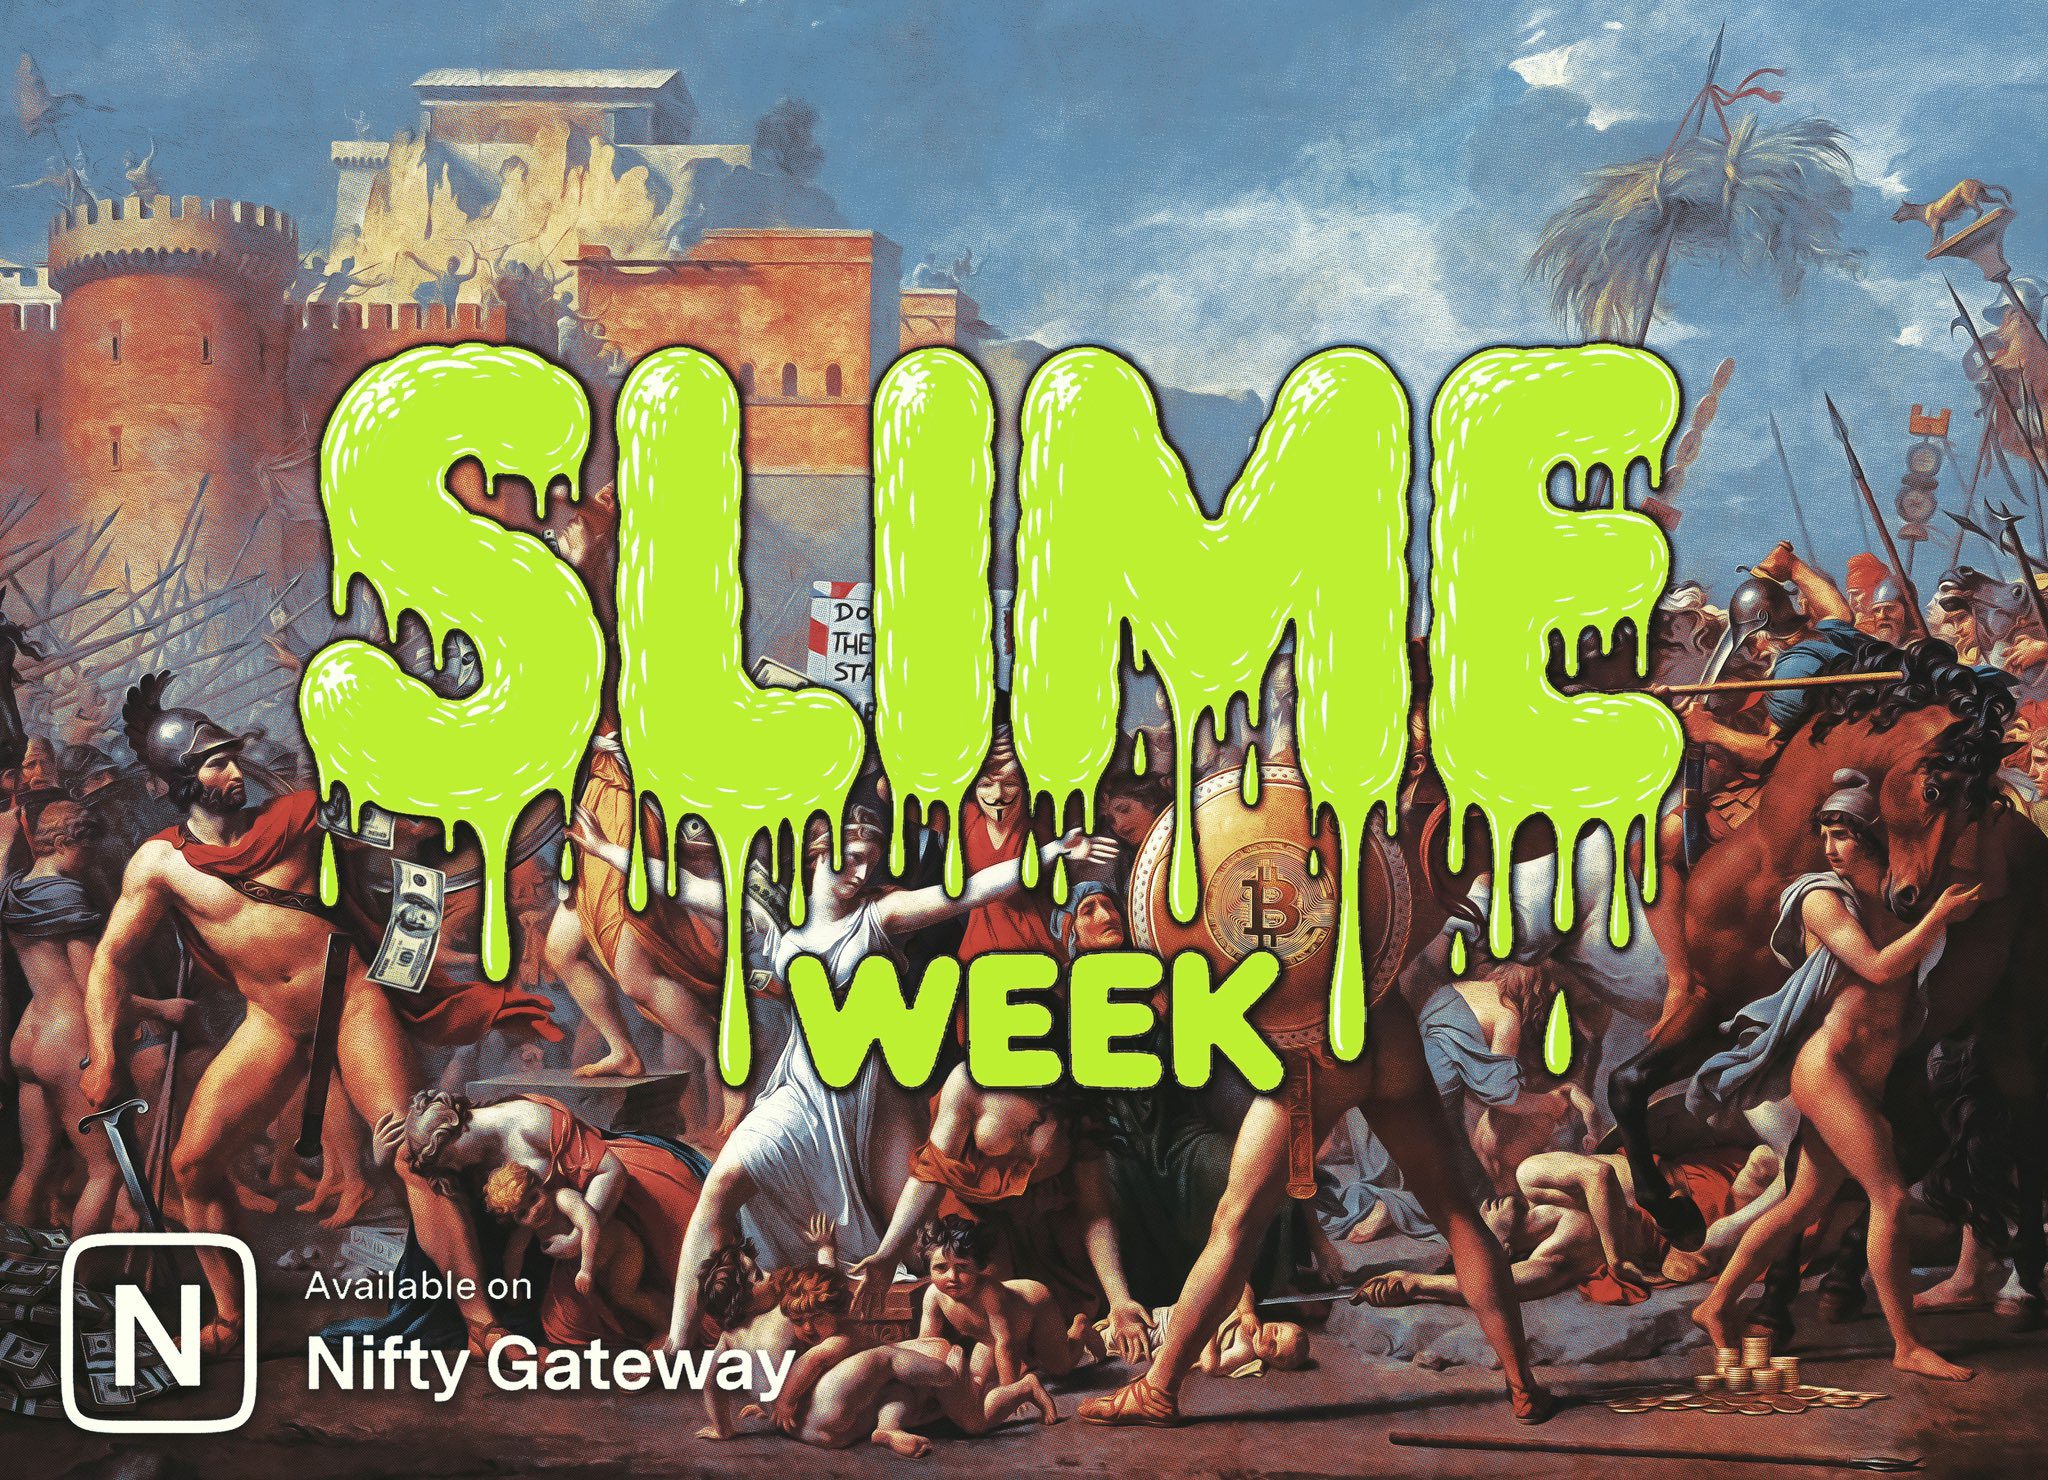 SlimeSunday Set to Celebrate 3 Year Anniversary of Last Stand of a Nation State